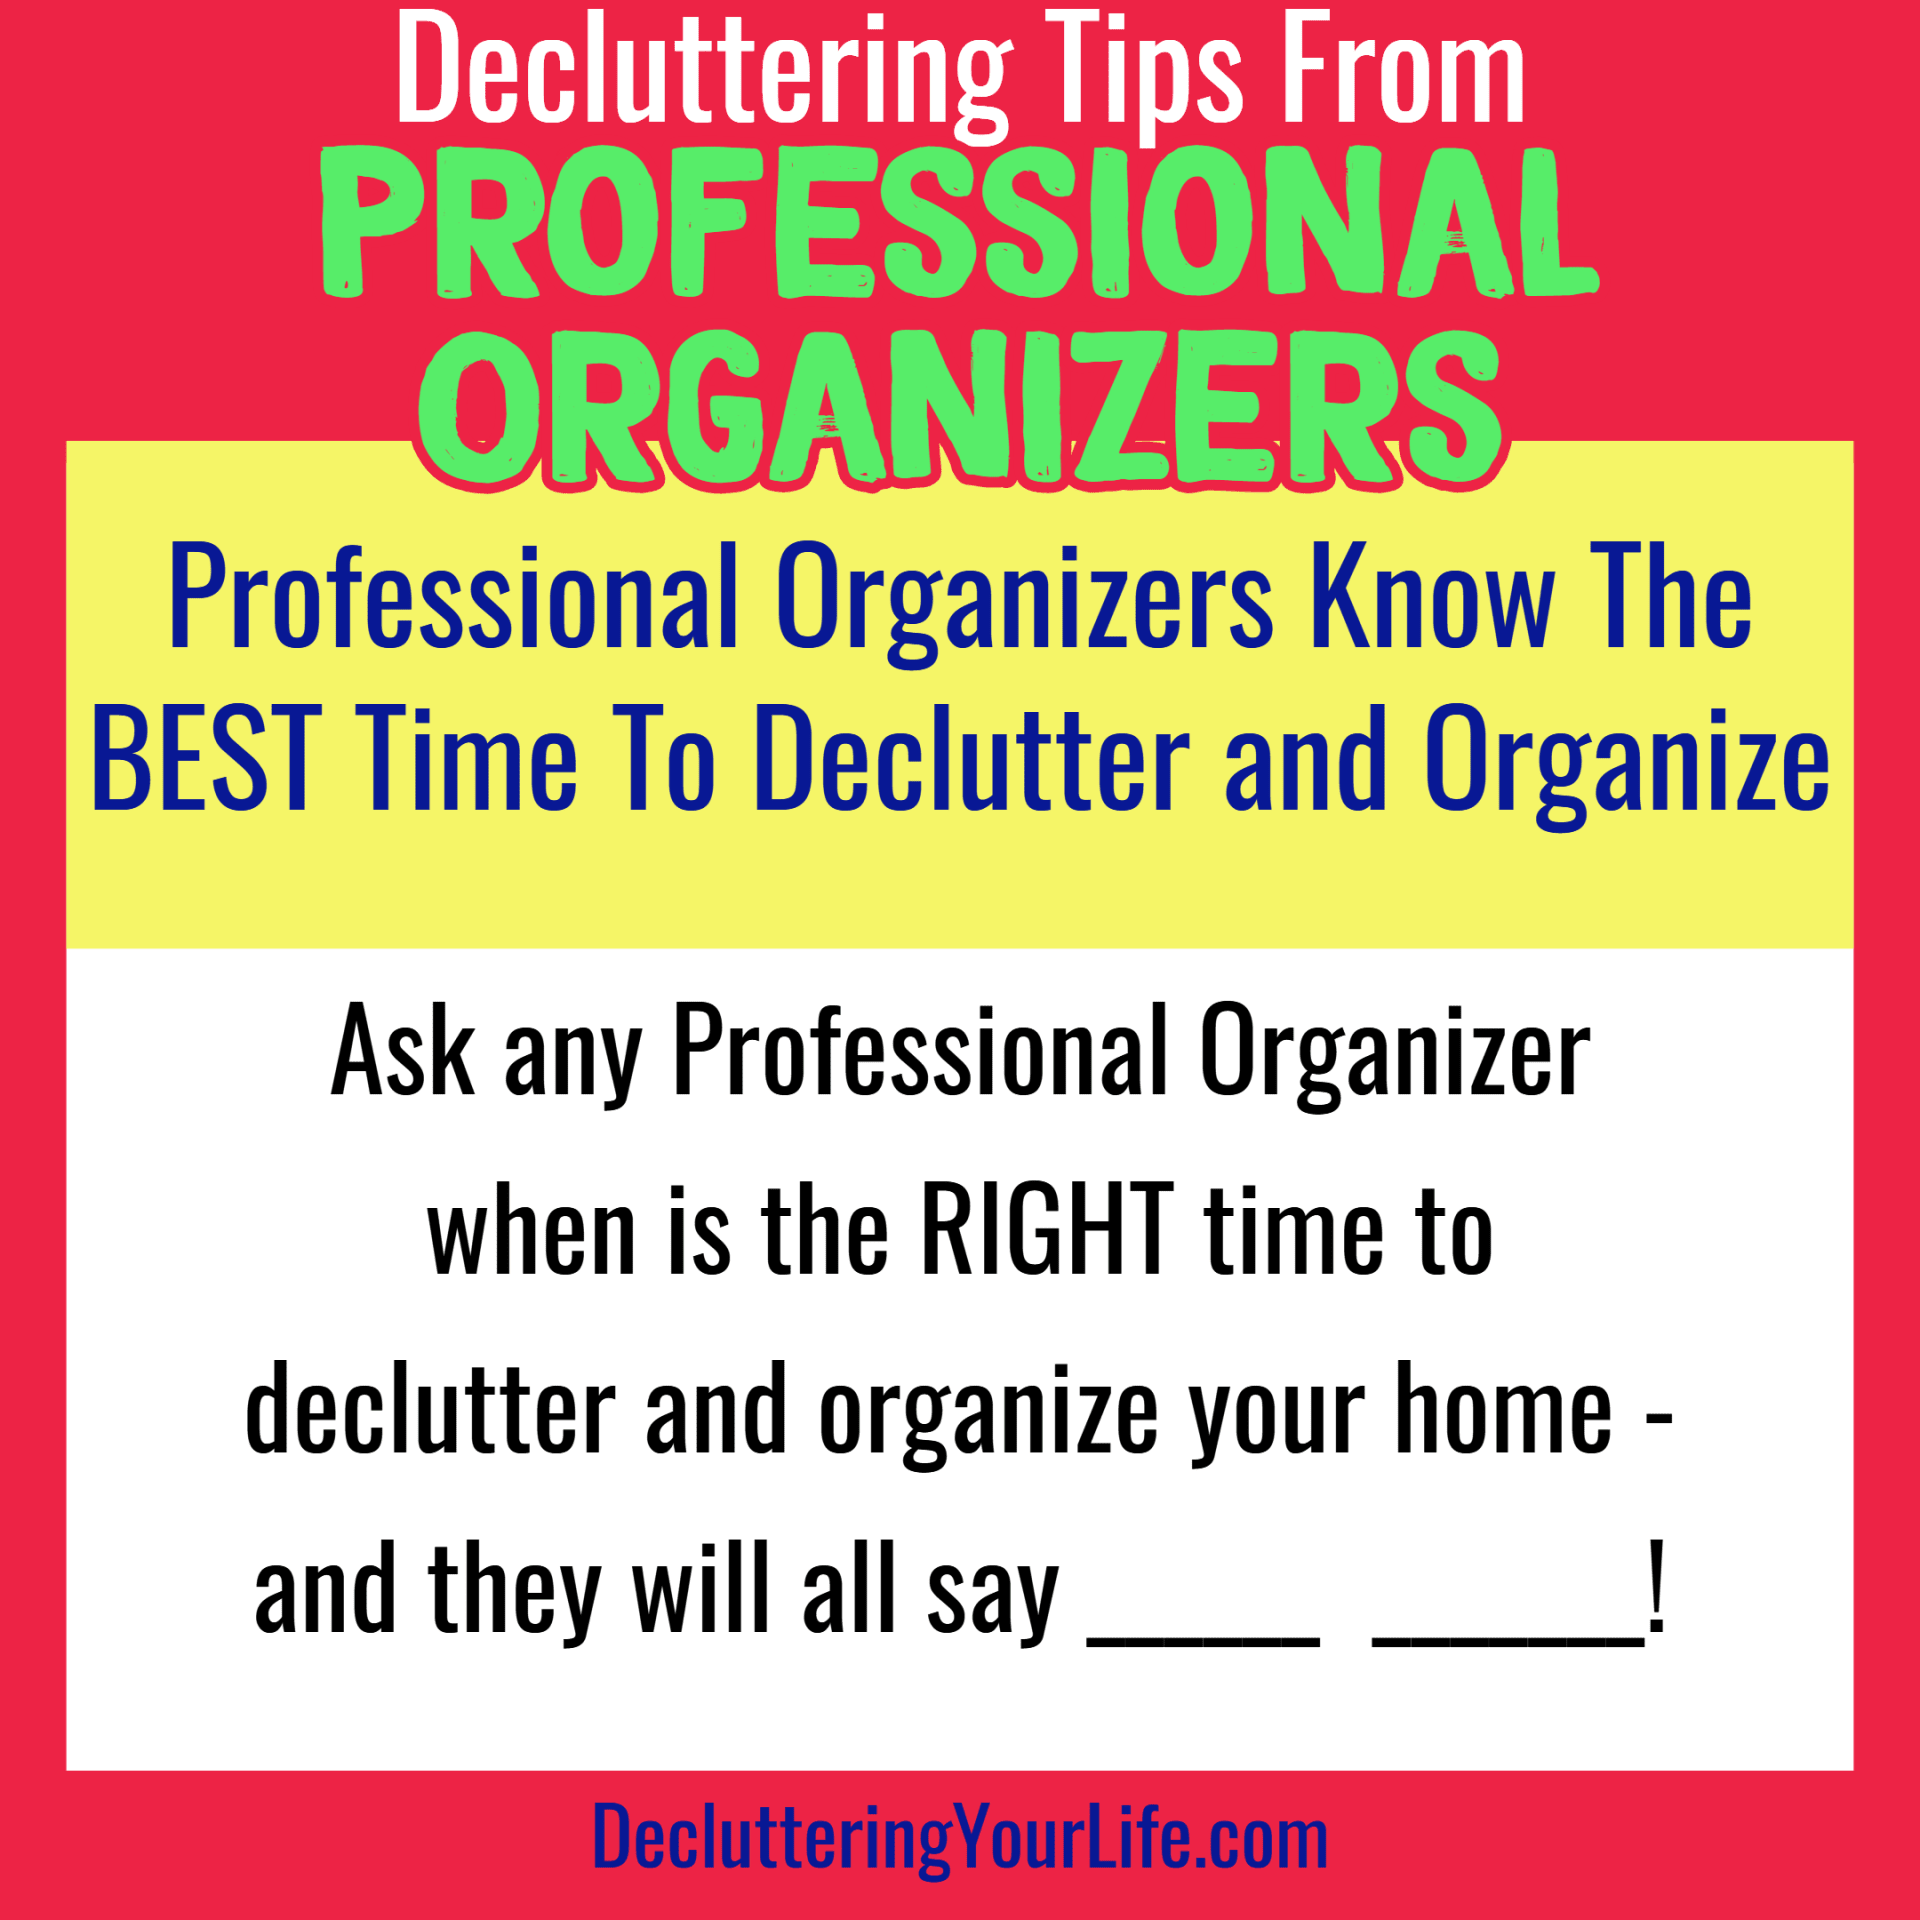 Tips from Professional Organizers - Feeling Overwhelmed by clutter and your messy house, here's some tips from the Pros to help you declutter and organize your home